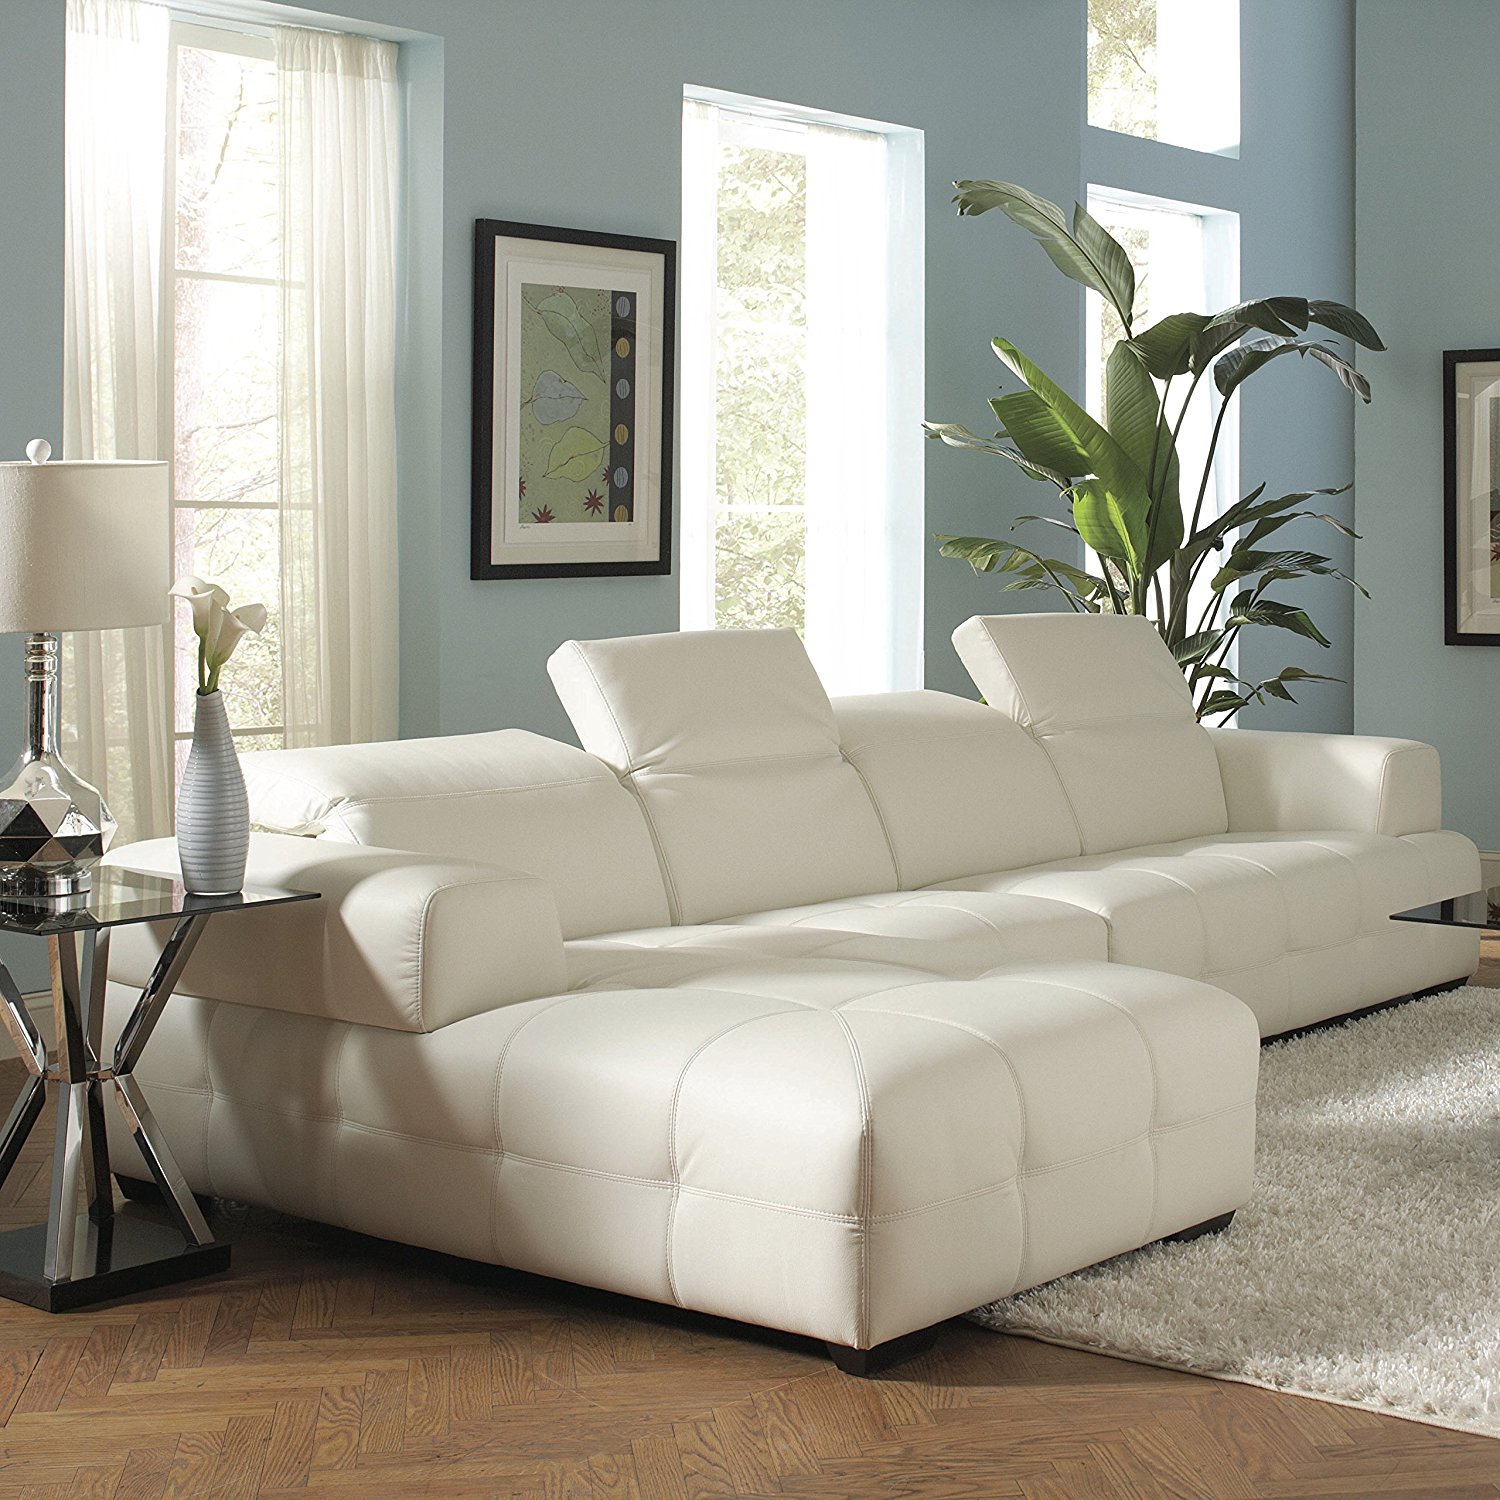 Coaster Home Furnishings 503617 Contemporary Sectional Sofa, White